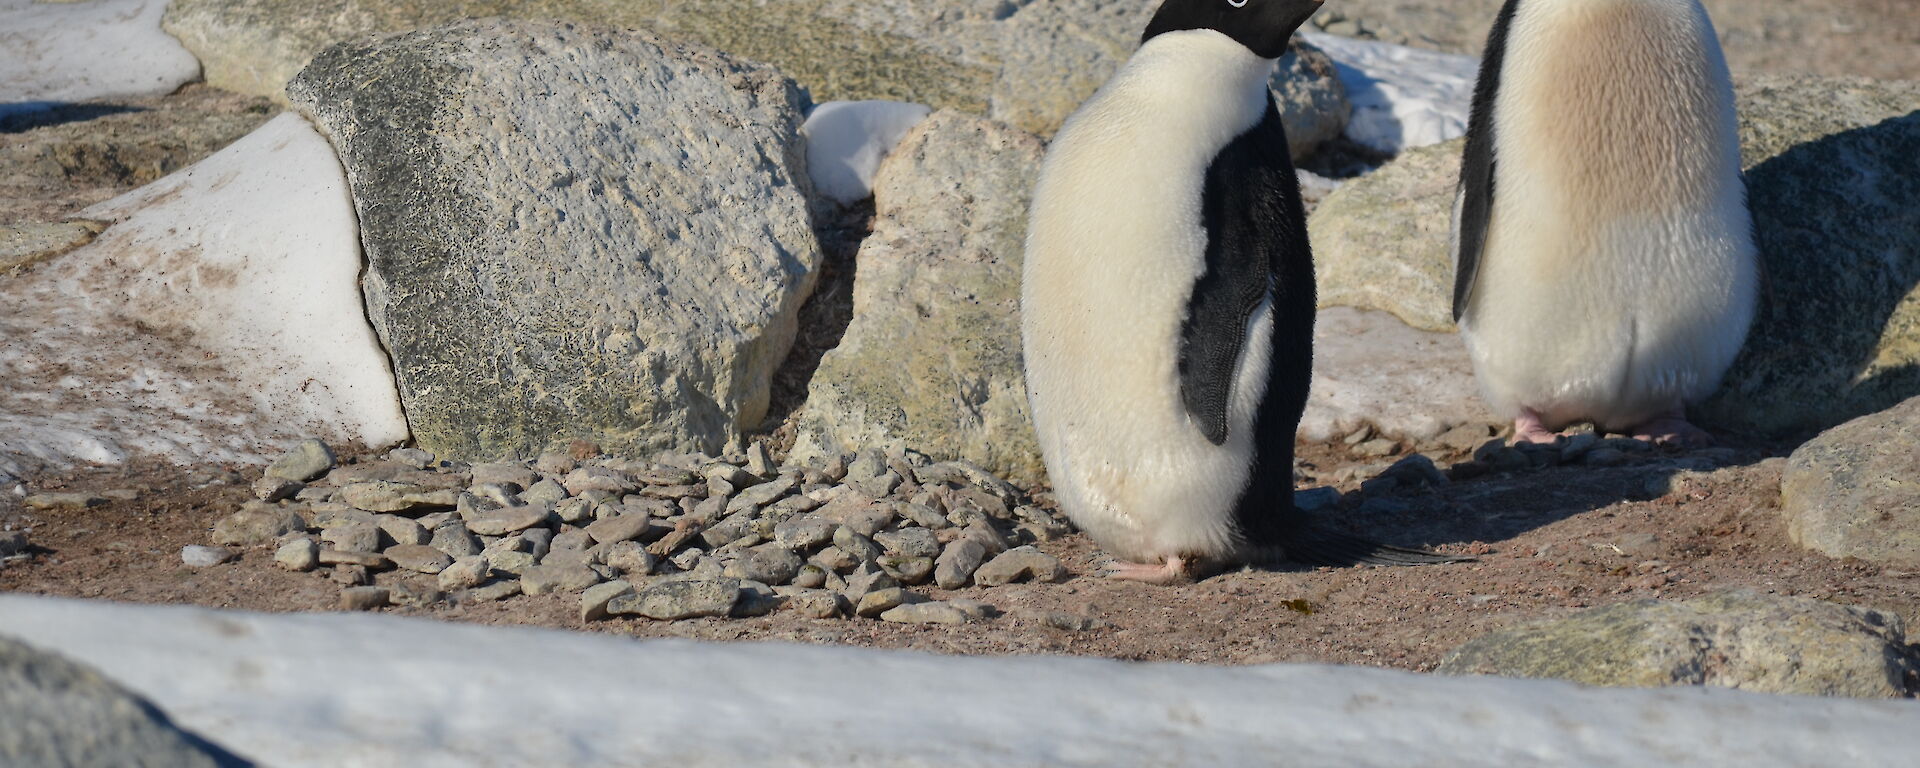 Two Adélie penguins standing next to a small pile of rocks